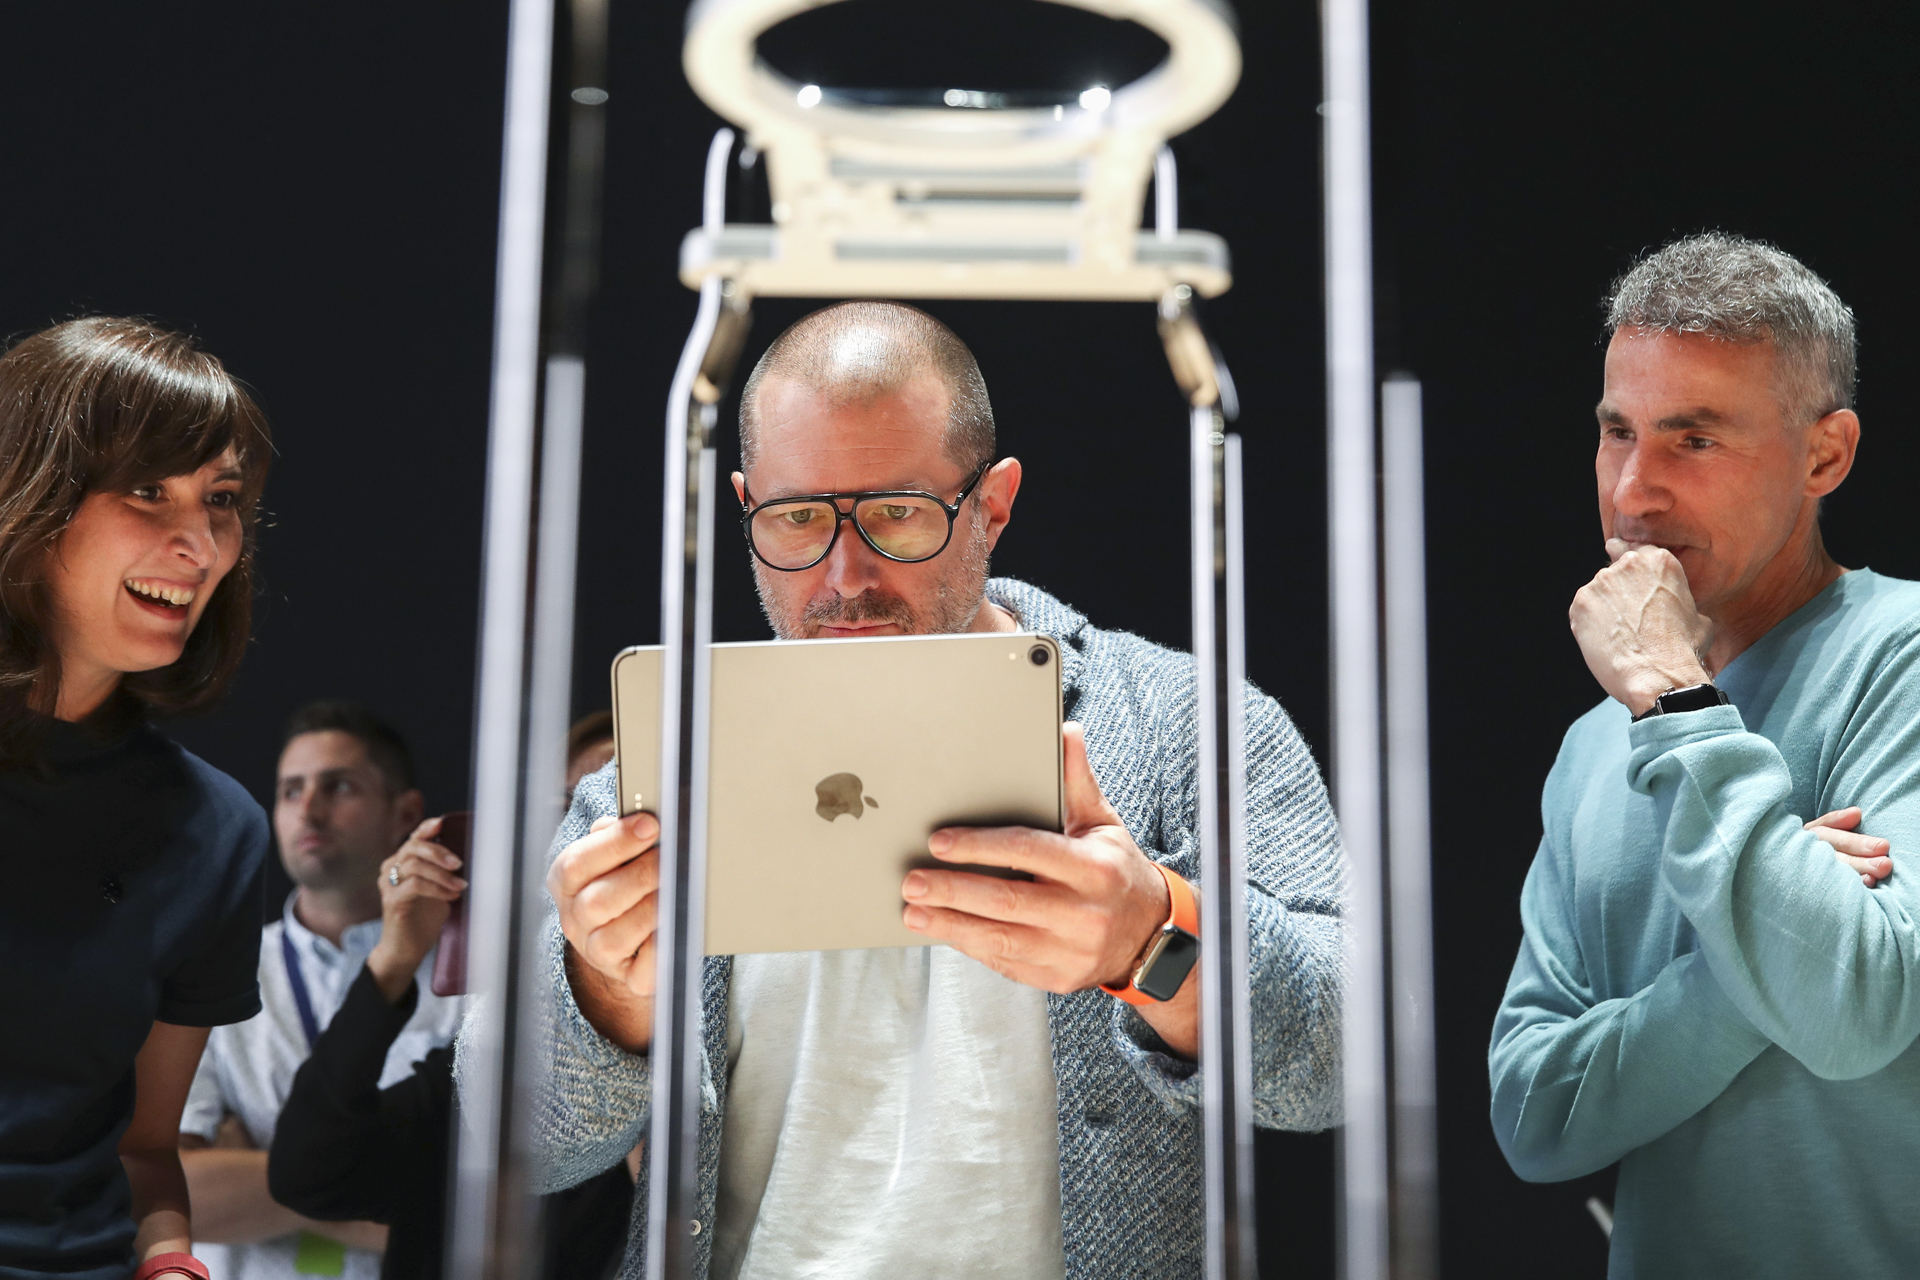 Apple's Jony Ive and Marc Newson Talk Up Design and the Apple